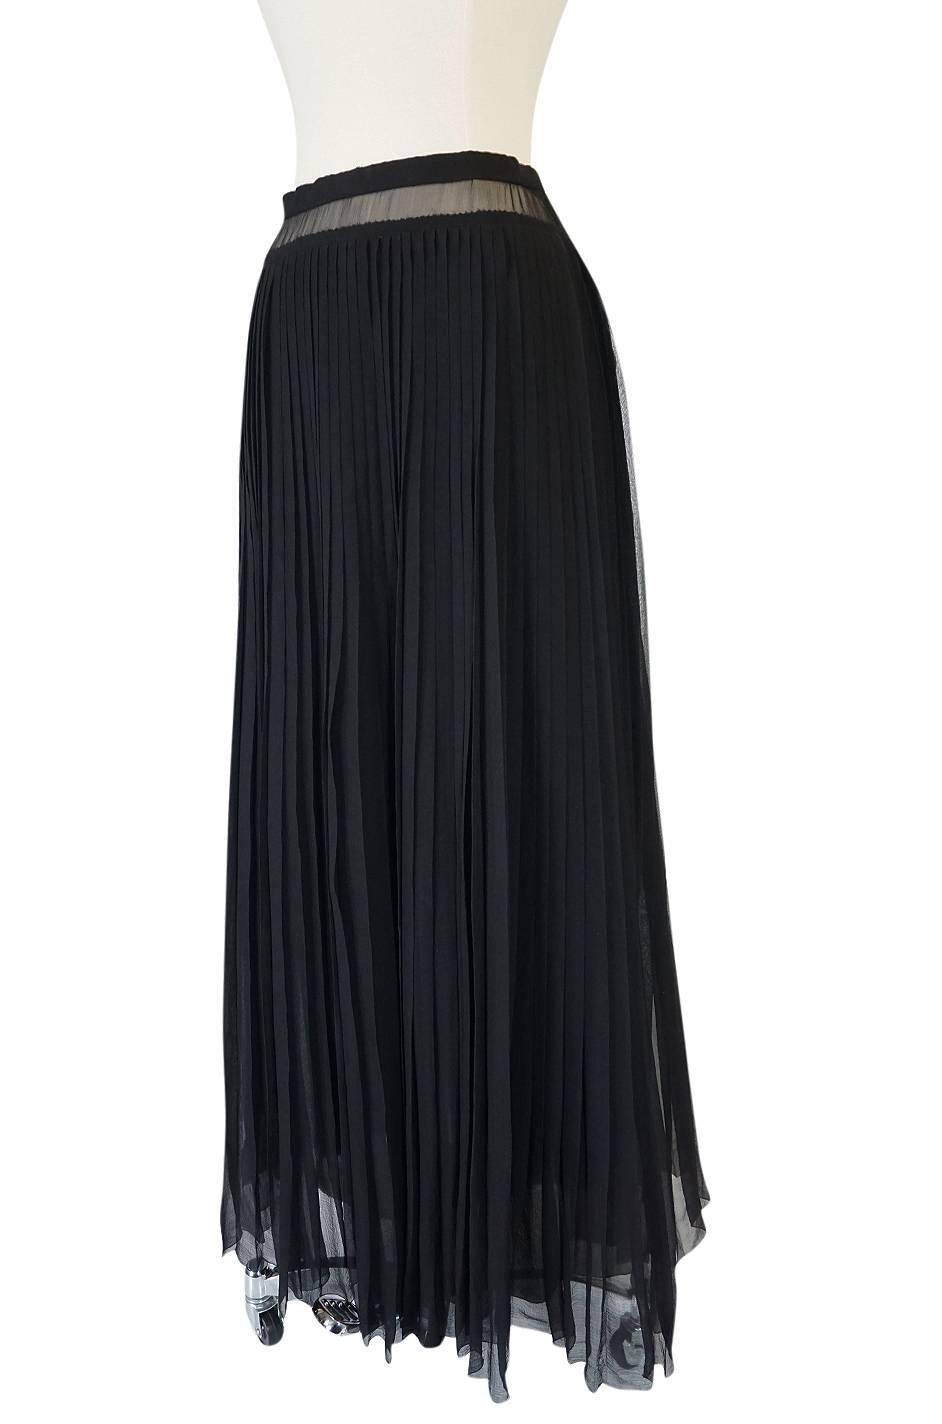 1970s Haute Couture Christian Dior Silk Chiffon Skirt For Sale at 1stdibs